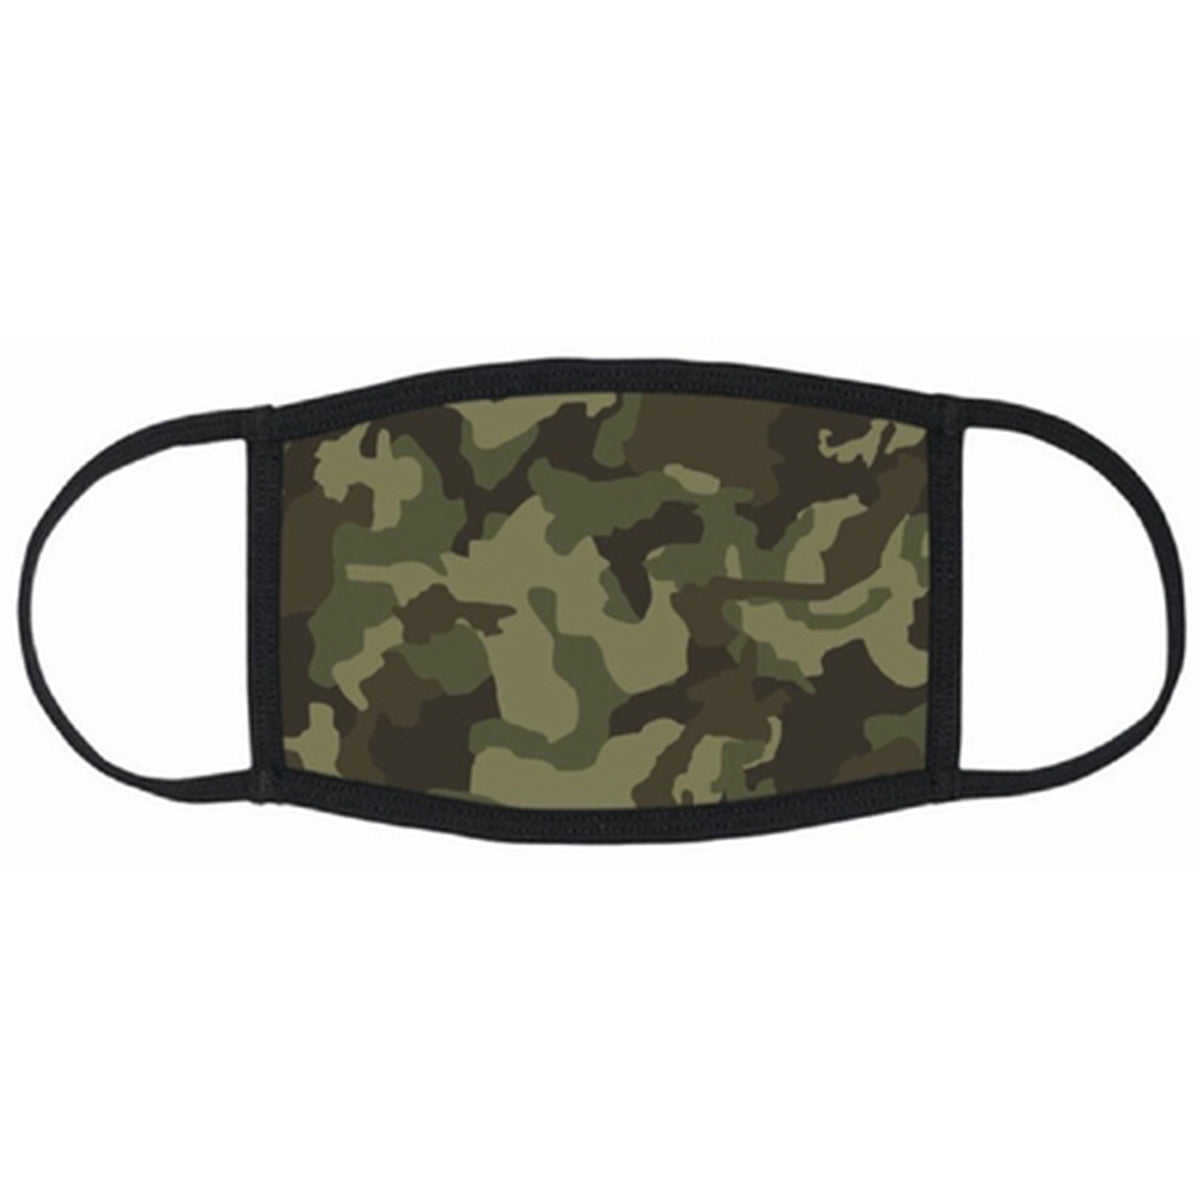 MSk-28 Green Camo Washable Face Mask with inner pocket for filter